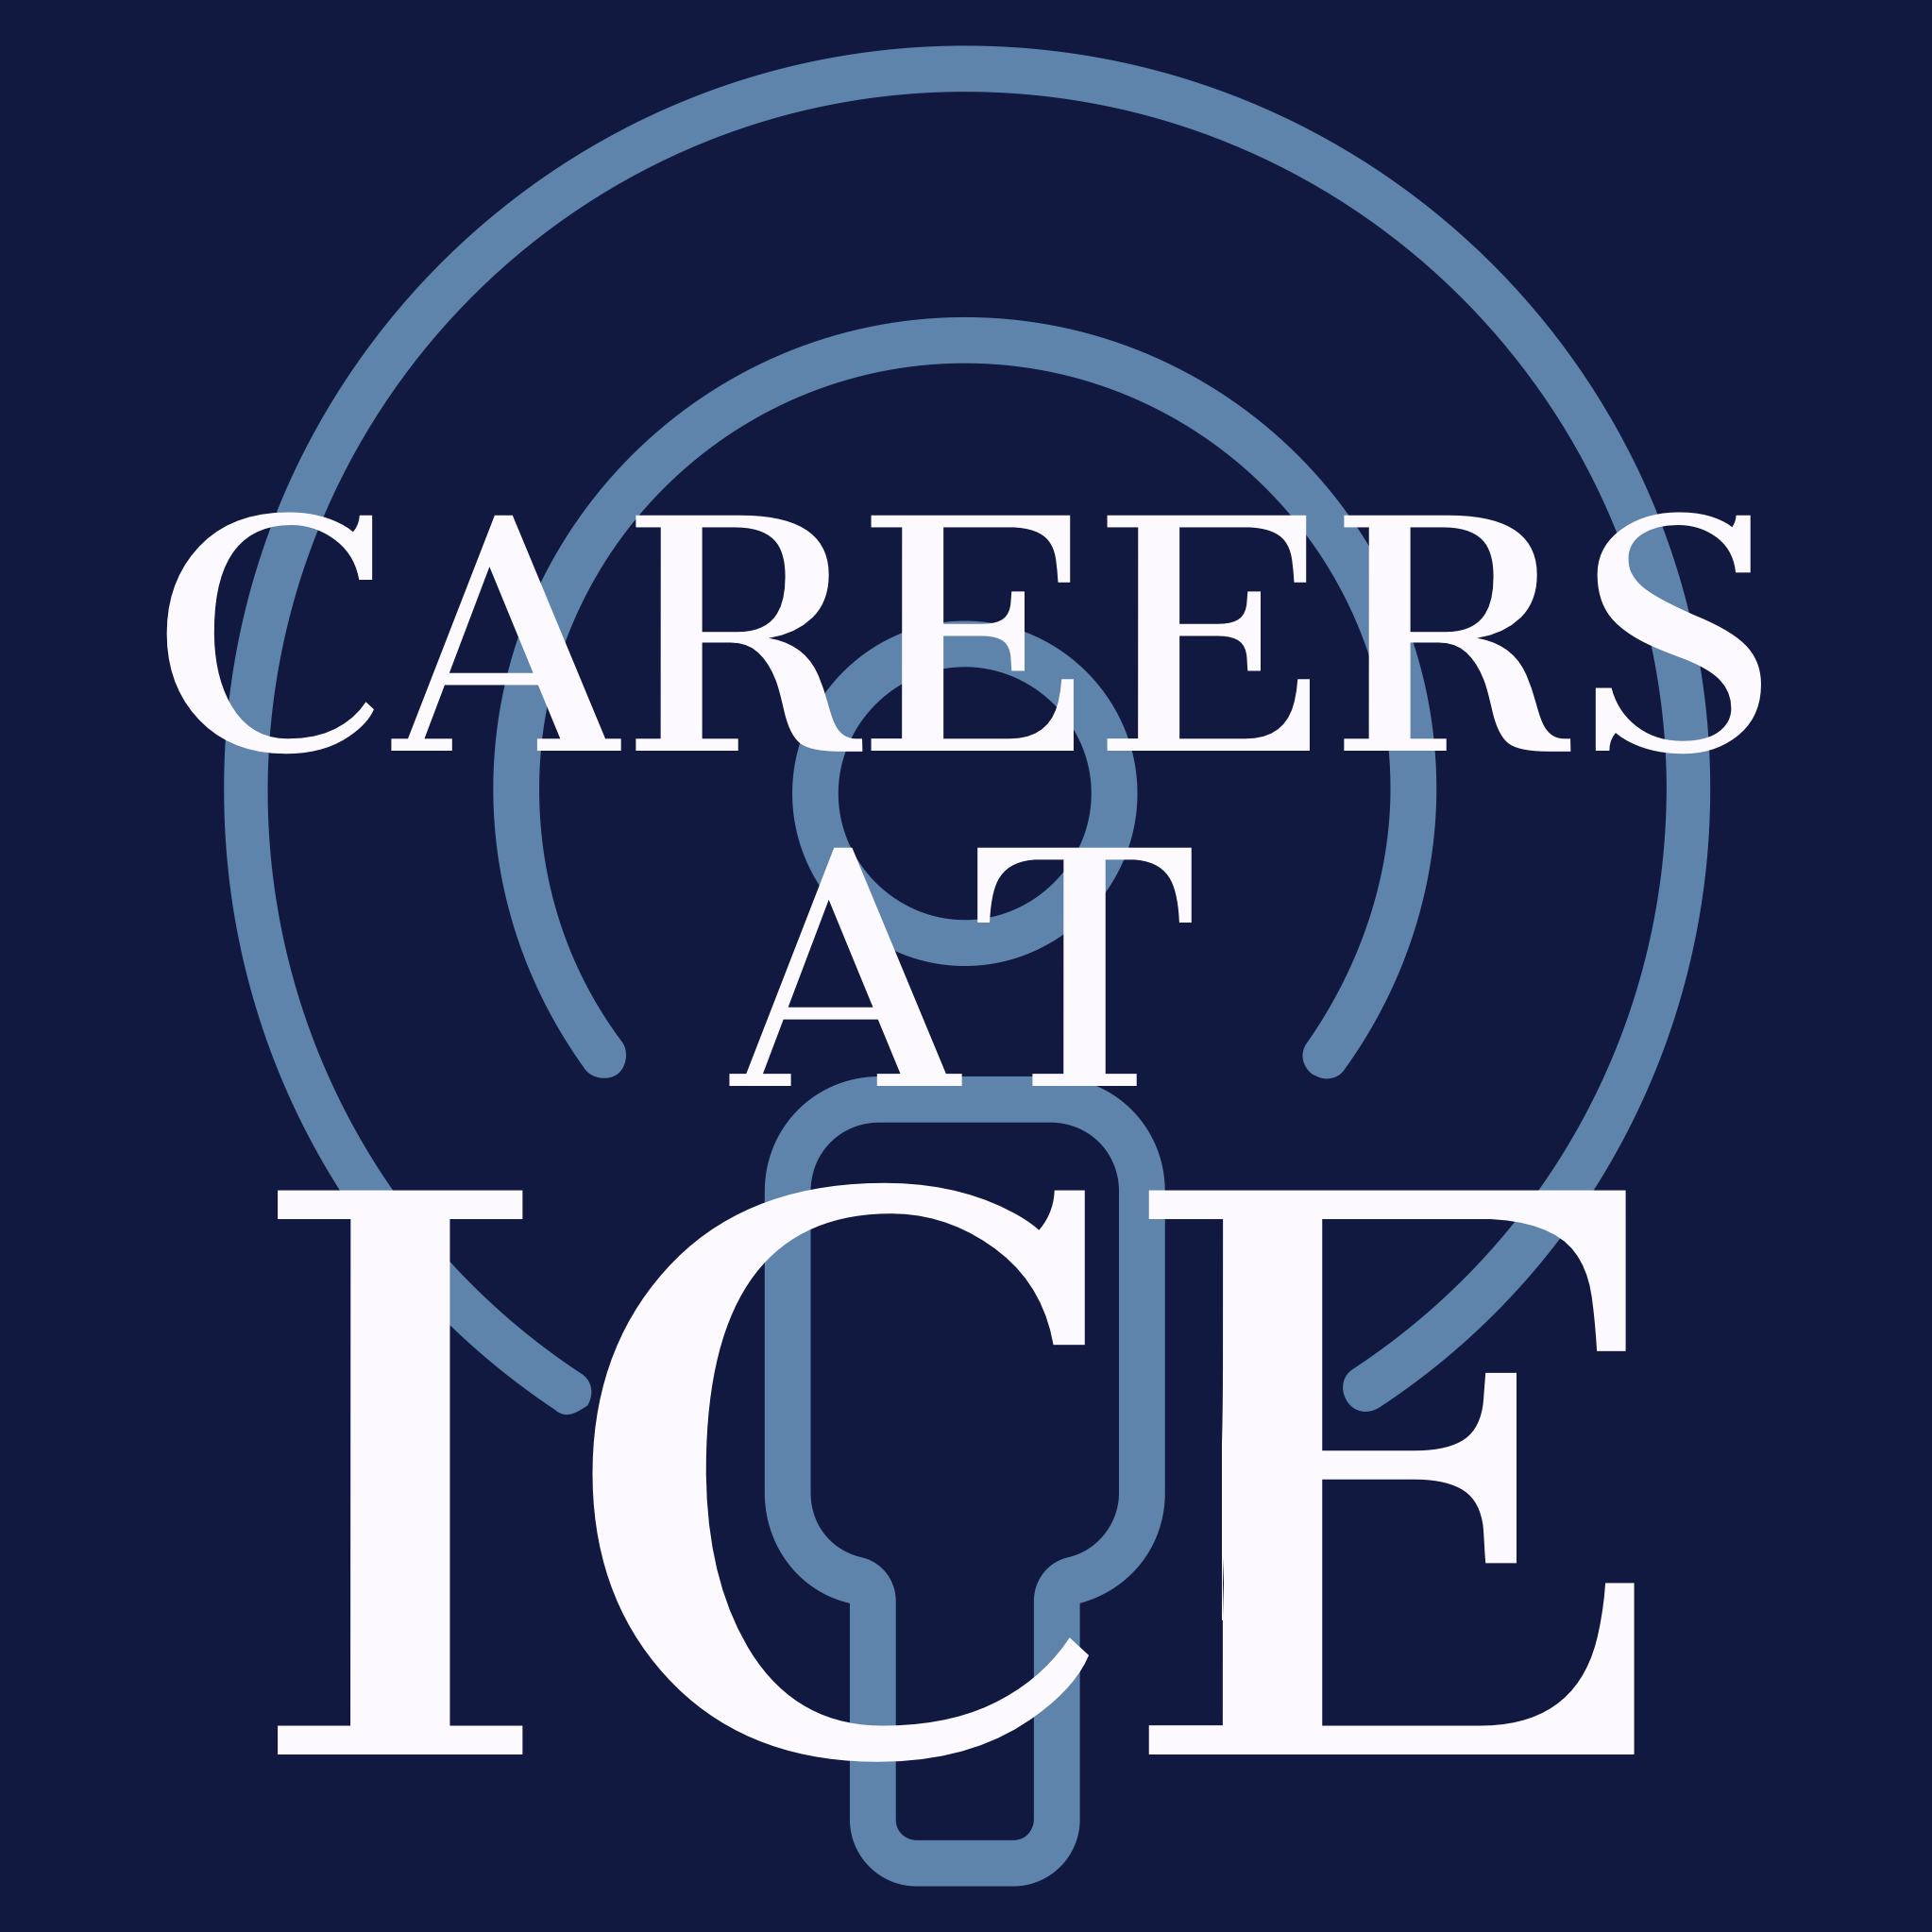 Careers at ICE Podcast